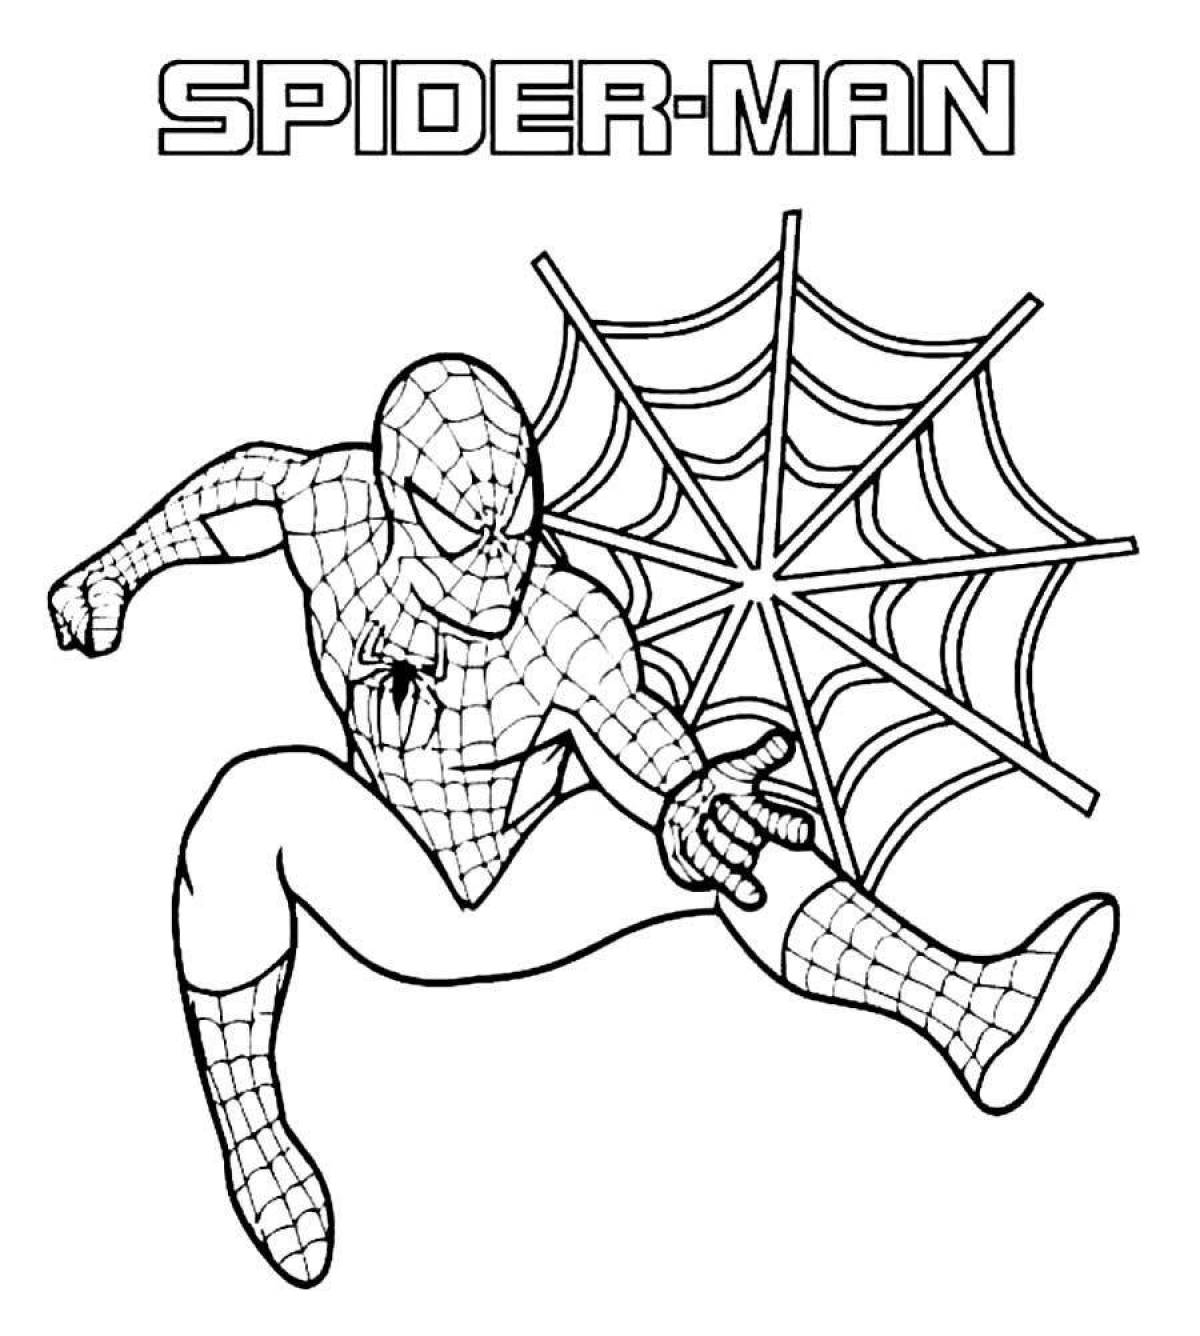 Spider-Man's fascinating anti-stress coloring book